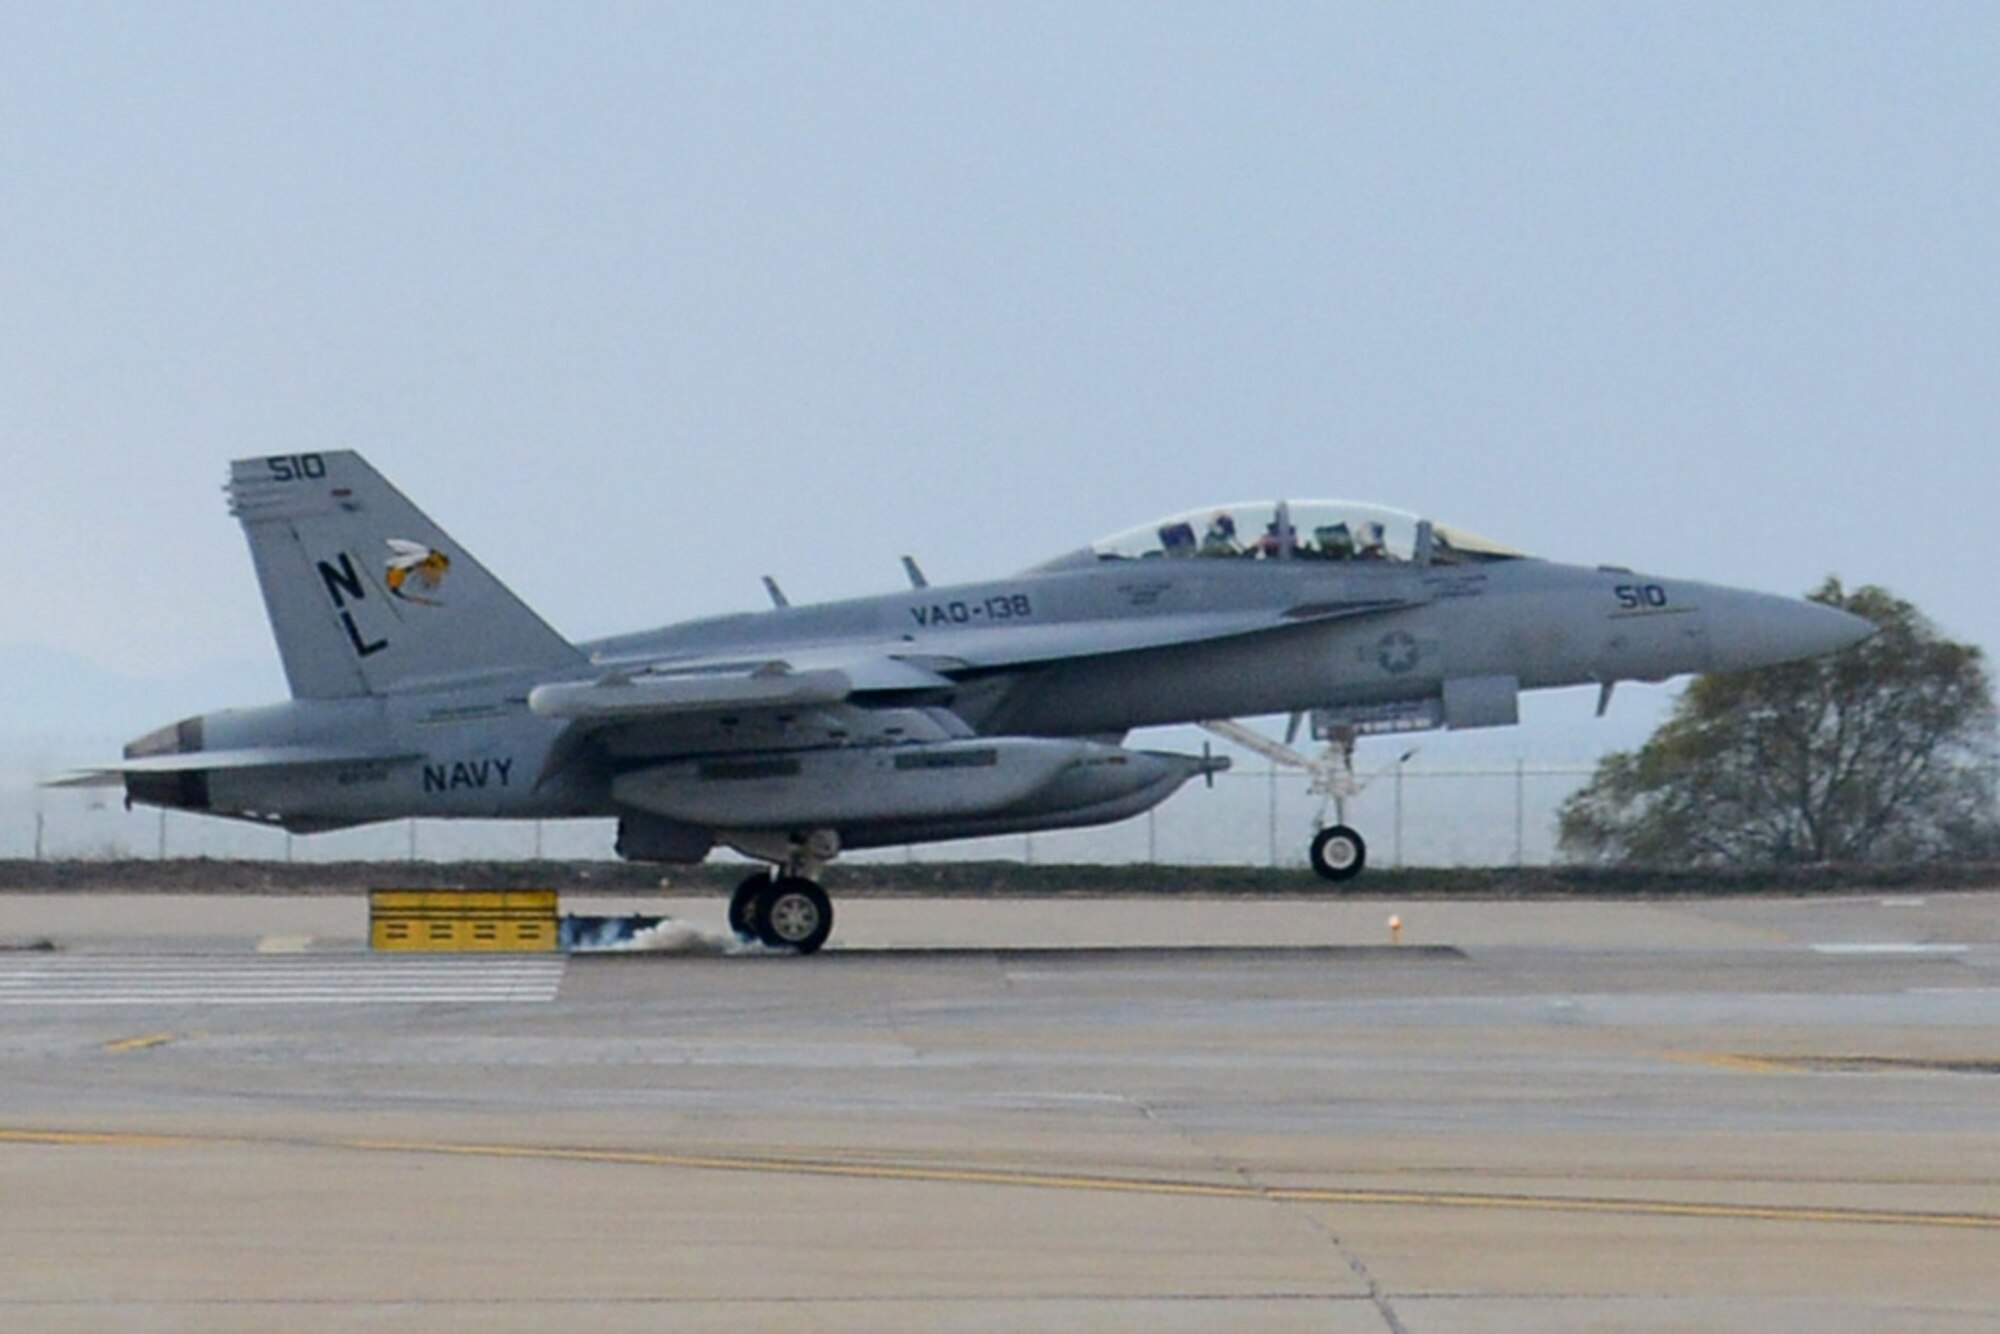 In this file photo, an EA-18G Growler assigned to the Yellow Jackets of Electronic Attack Squadron (VAQ) 138 lands on the runway of Kunsan Air Base, South Korea. (U.S. Navy/MC1 Frank L. Andrews) 